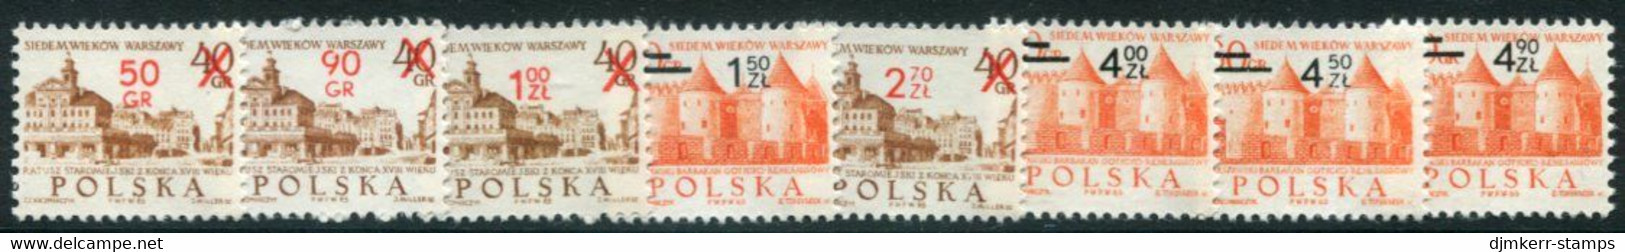 POLAND 1972 Surcharges MNH / **. Michel 2195-200, 2209-10 - Unused Stamps